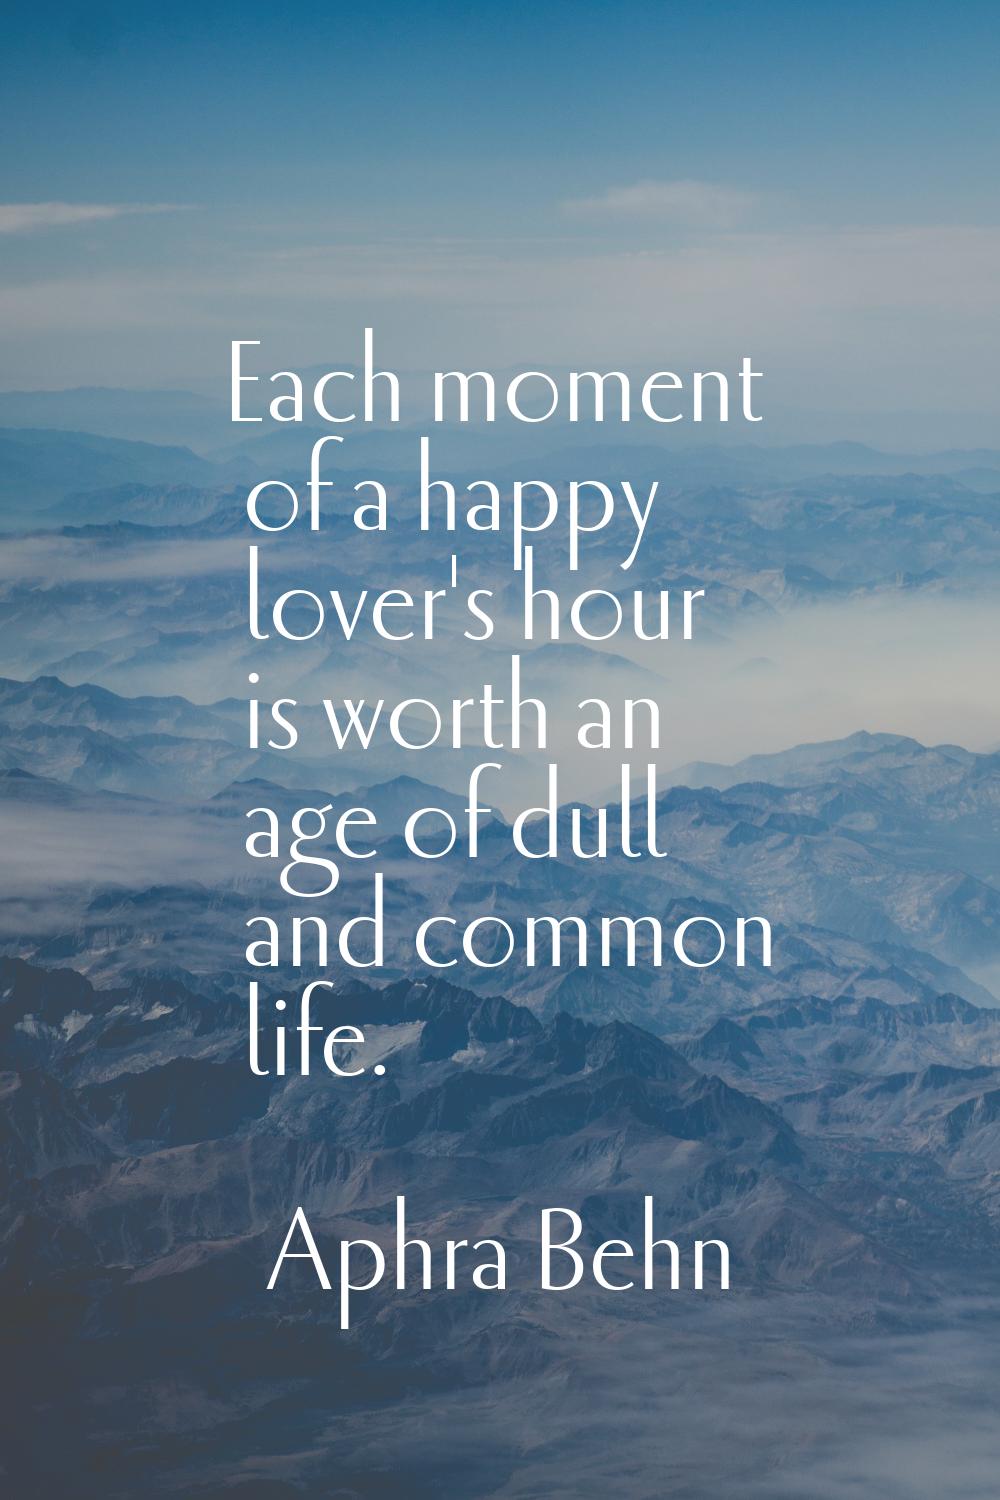 Each moment of a happy lover's hour is worth an age of dull and common life.